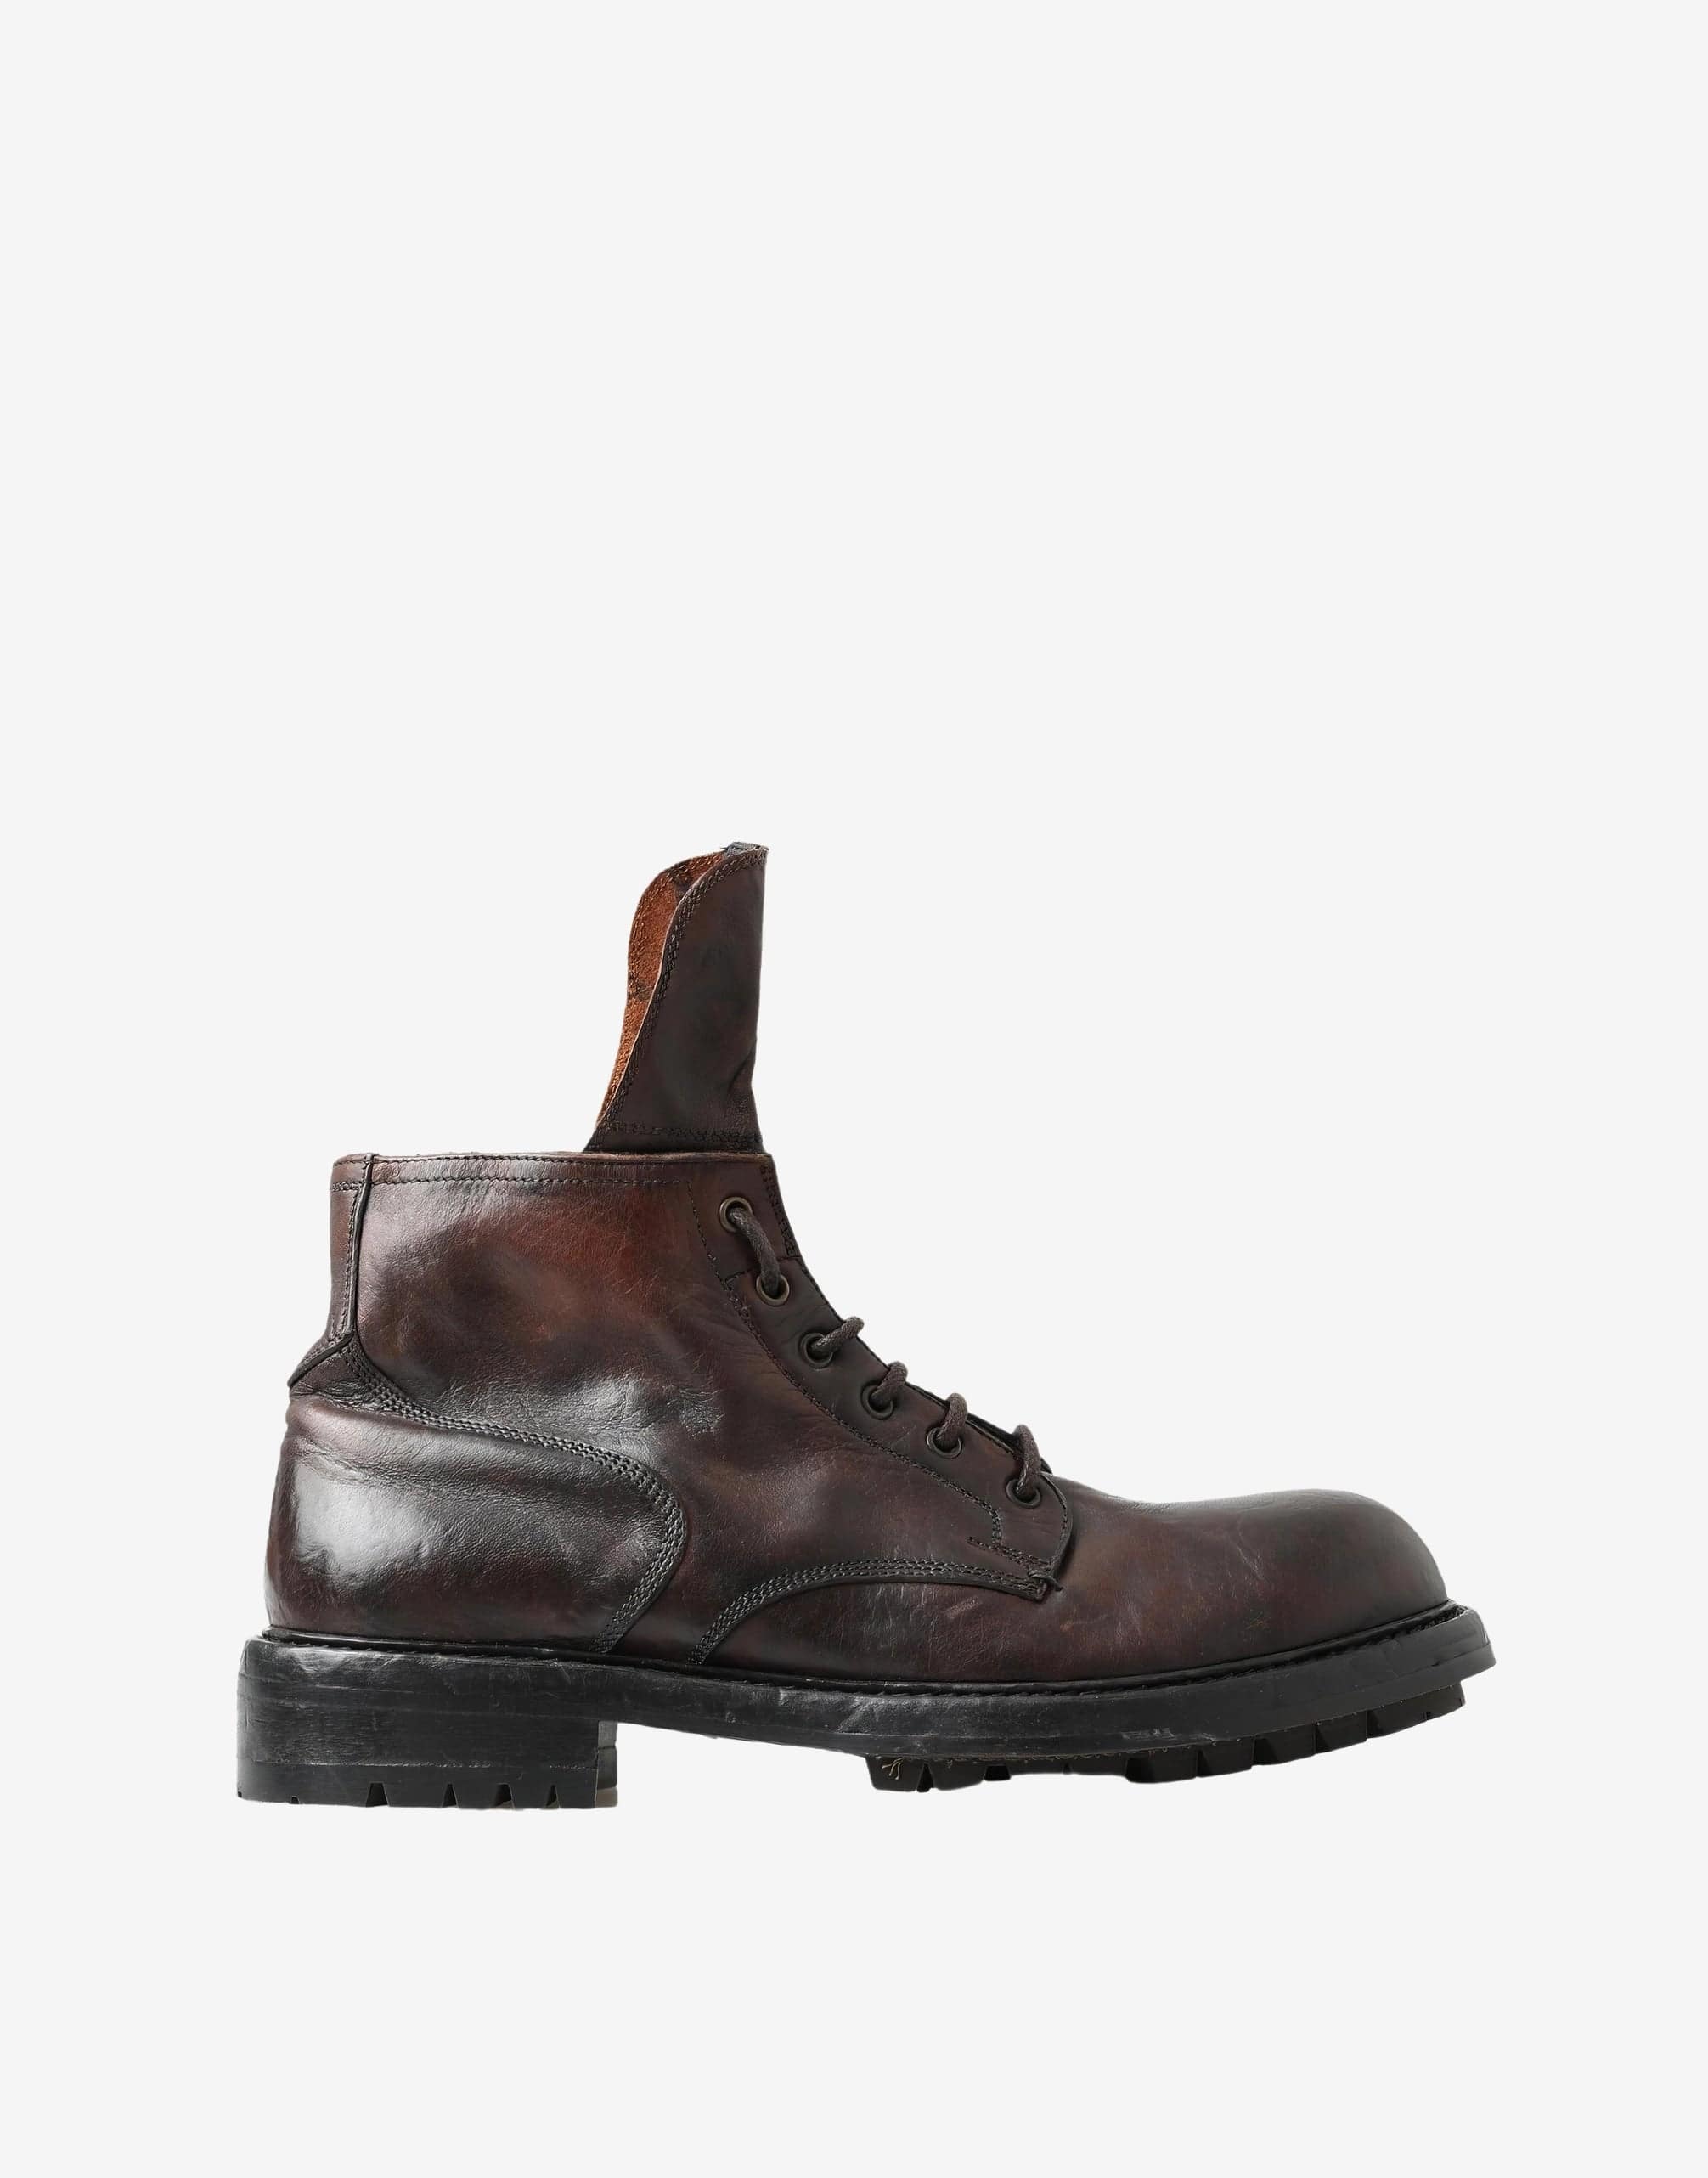 Dolce & Gabbana Men Brown Leather Ankle Boots Shoes